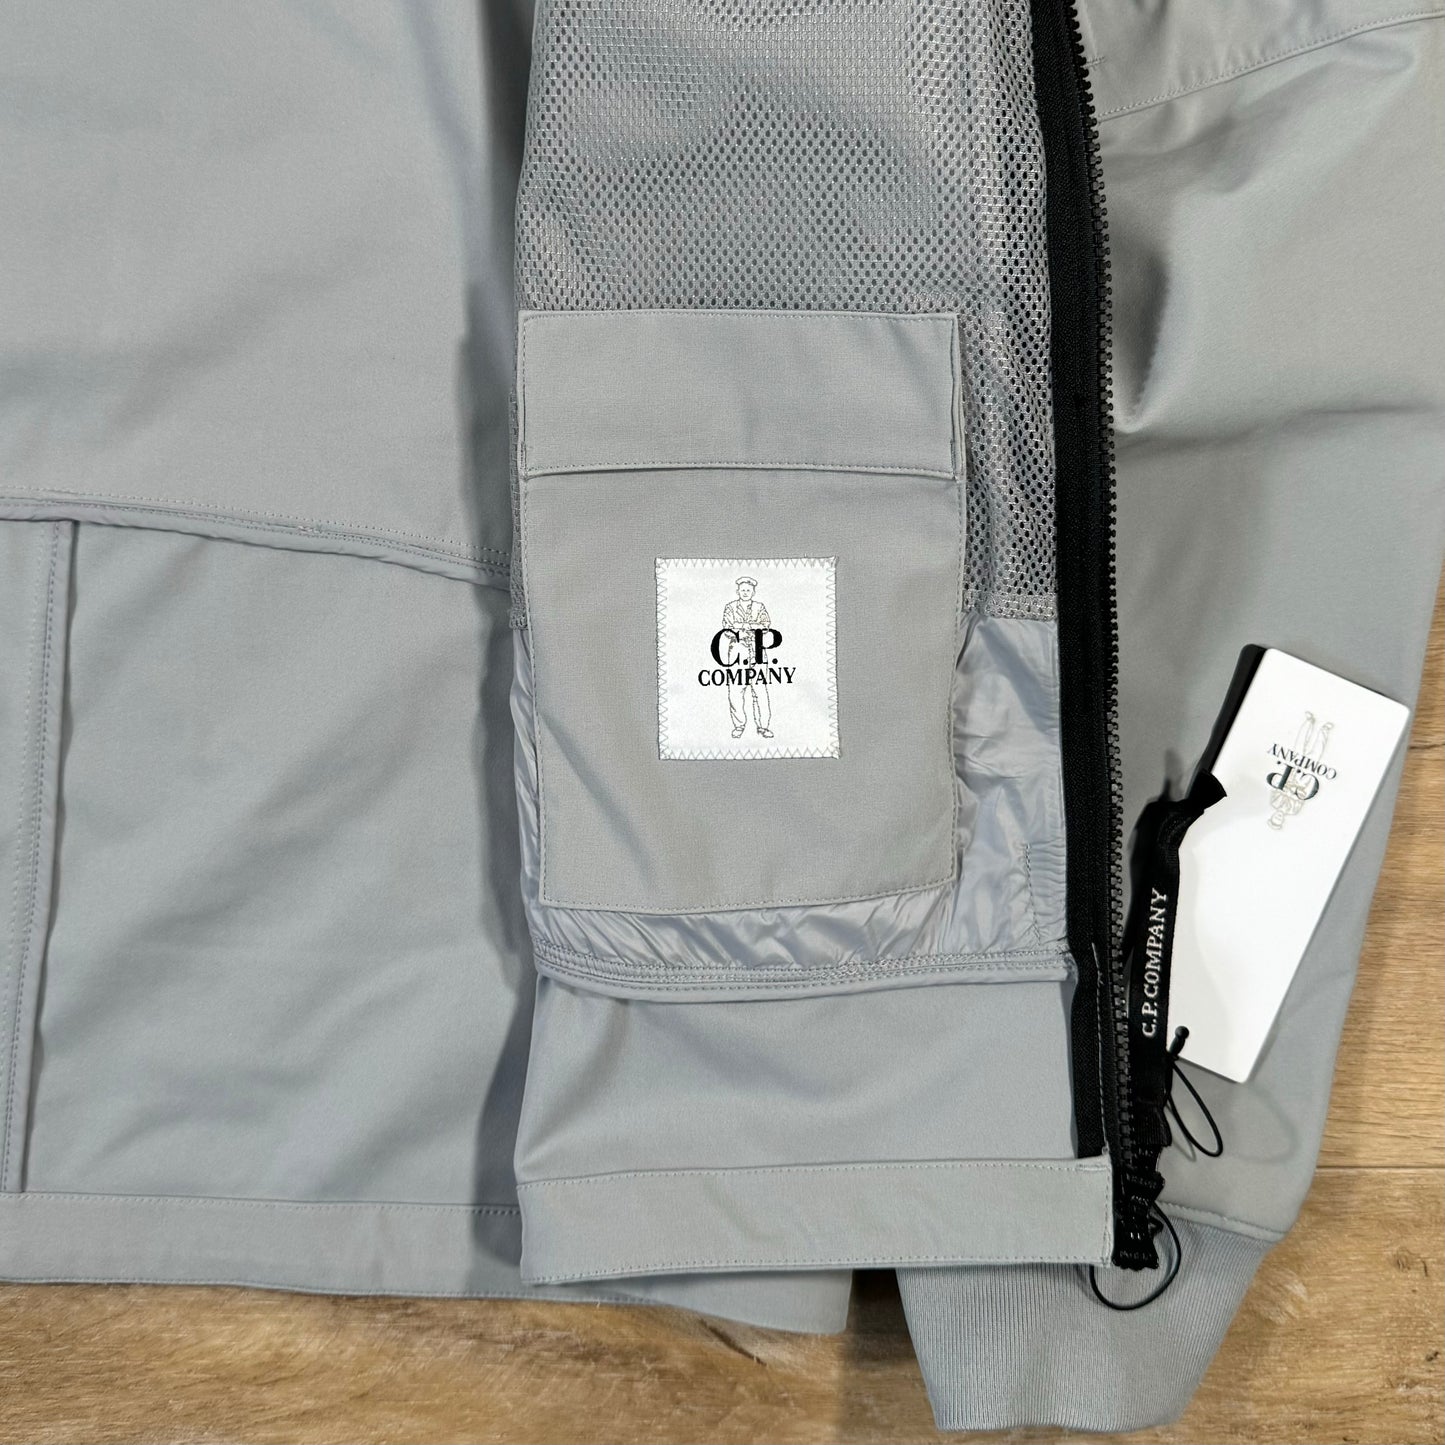 C.P. Company Soft Shell Lens Jacket in Drizzle Grey